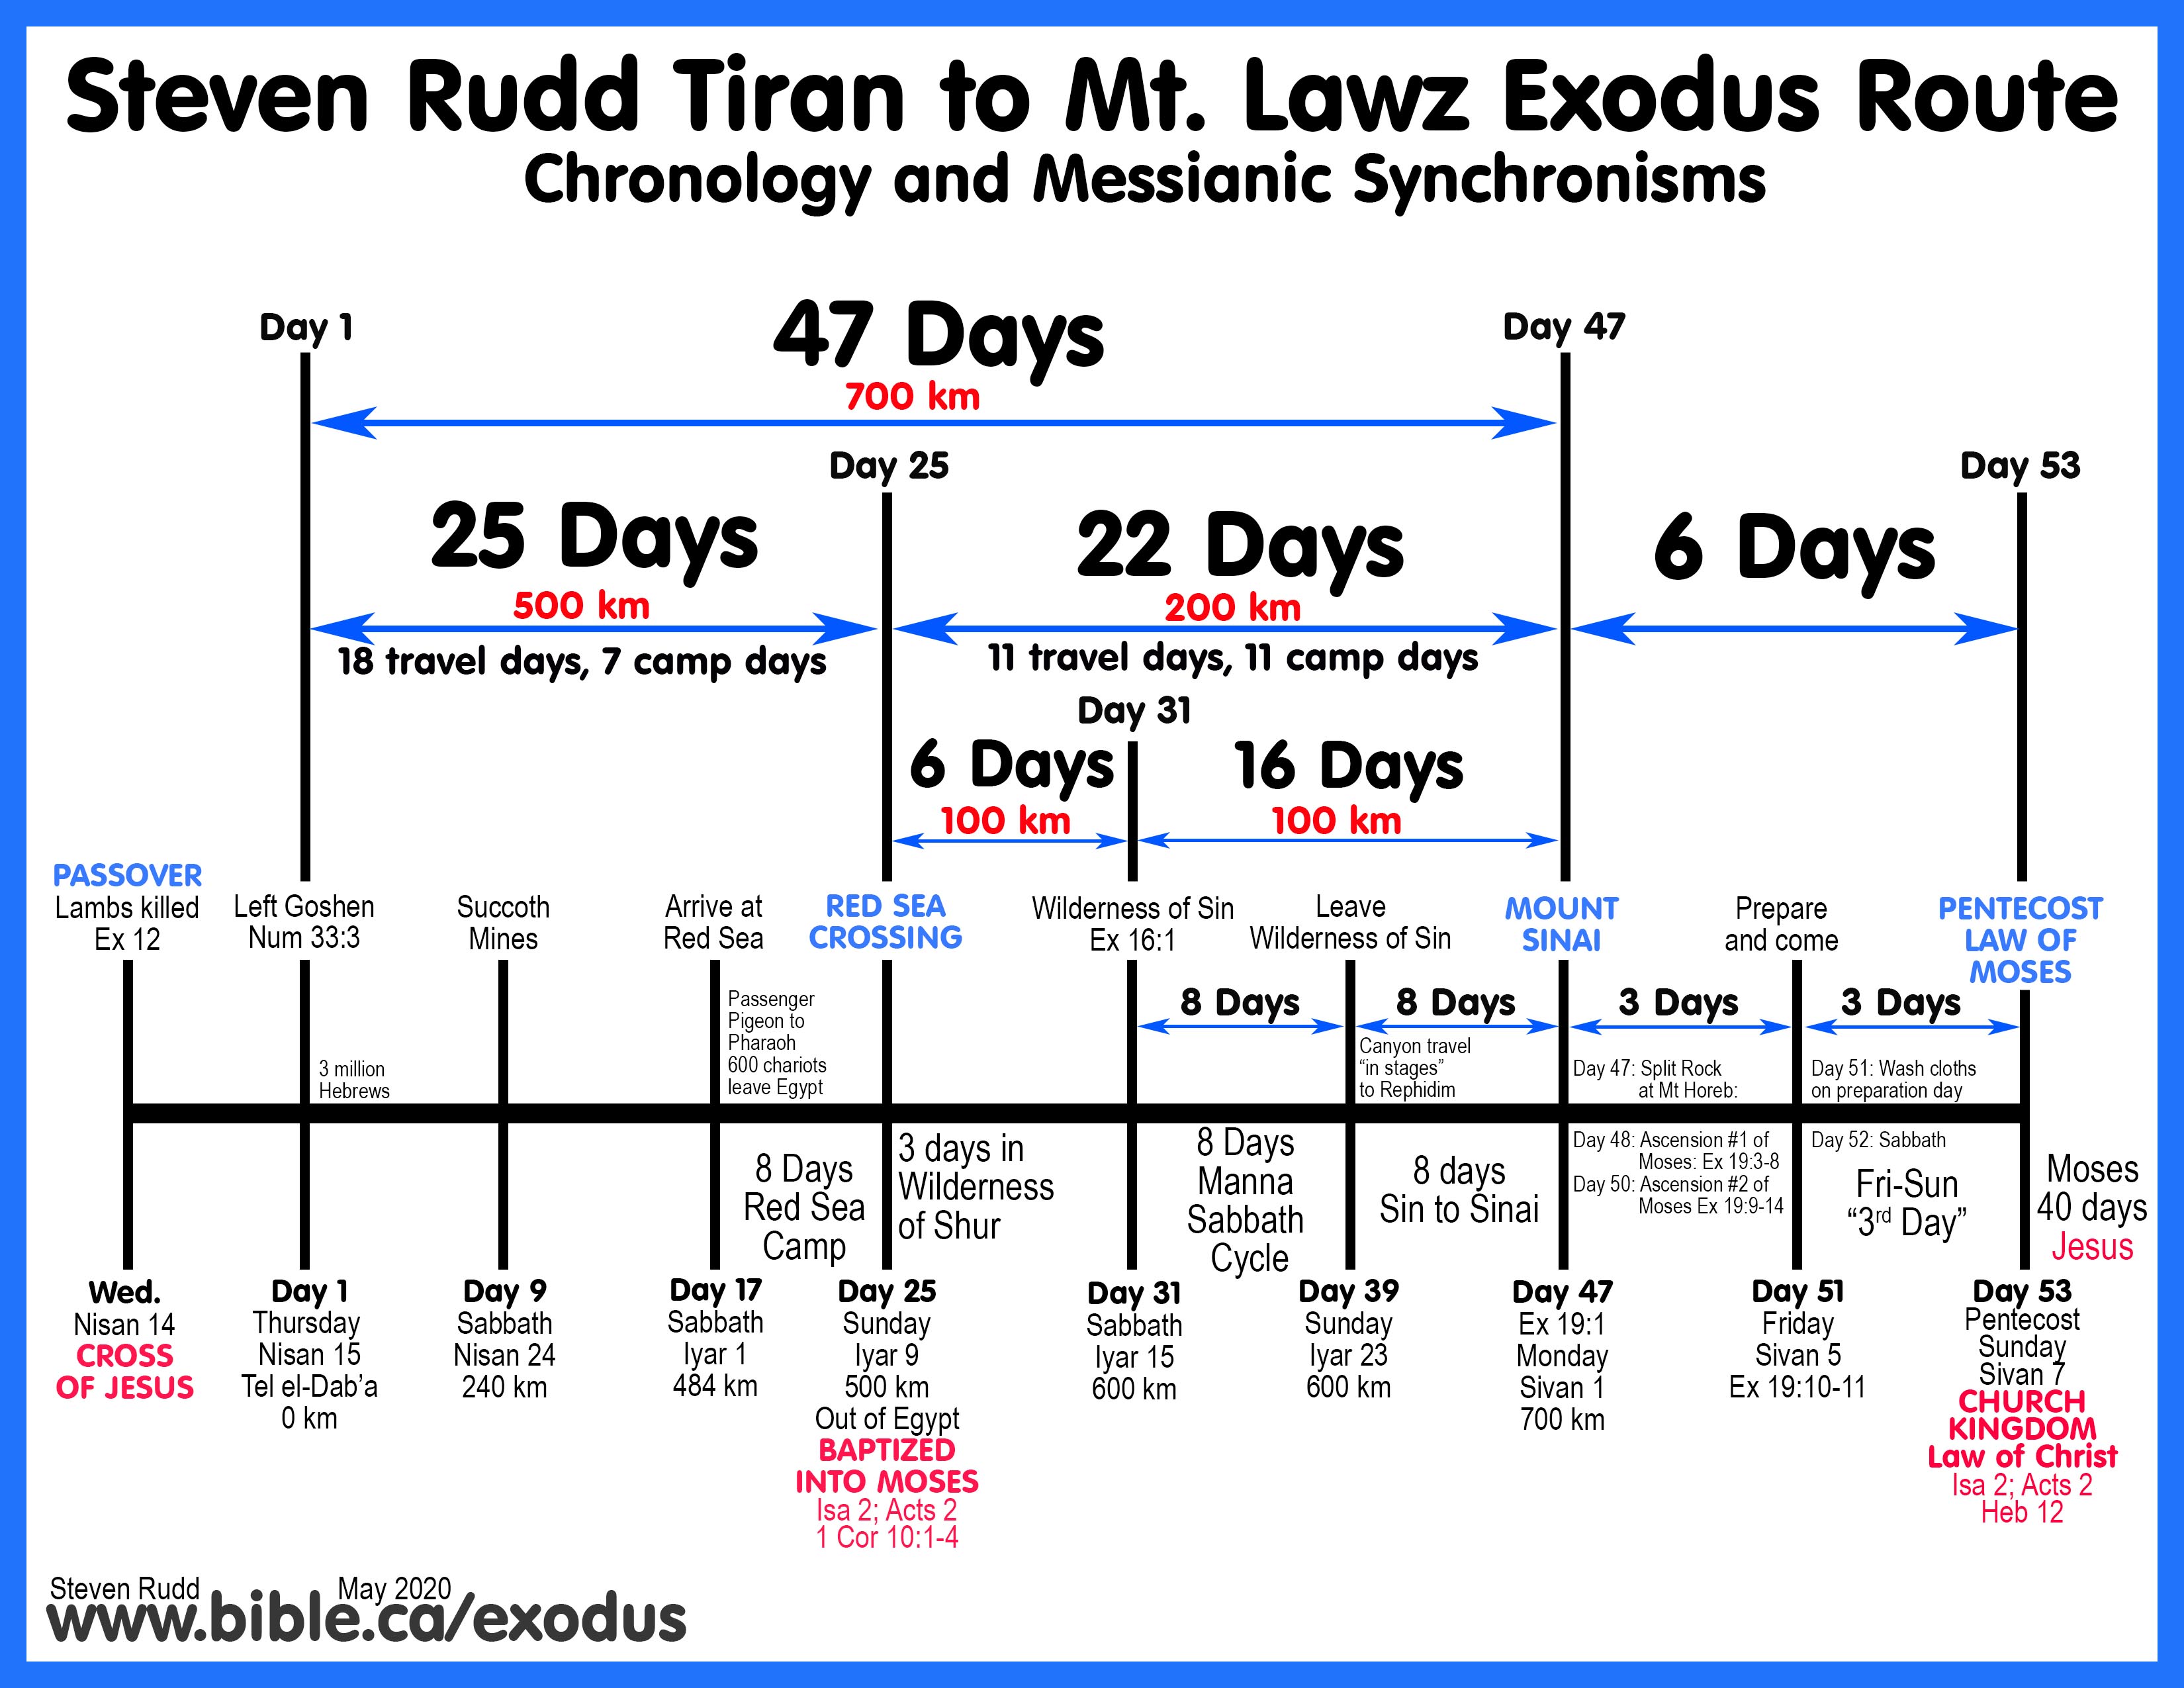 The Exodus Route Travel times, distances, rates of travel, days of the